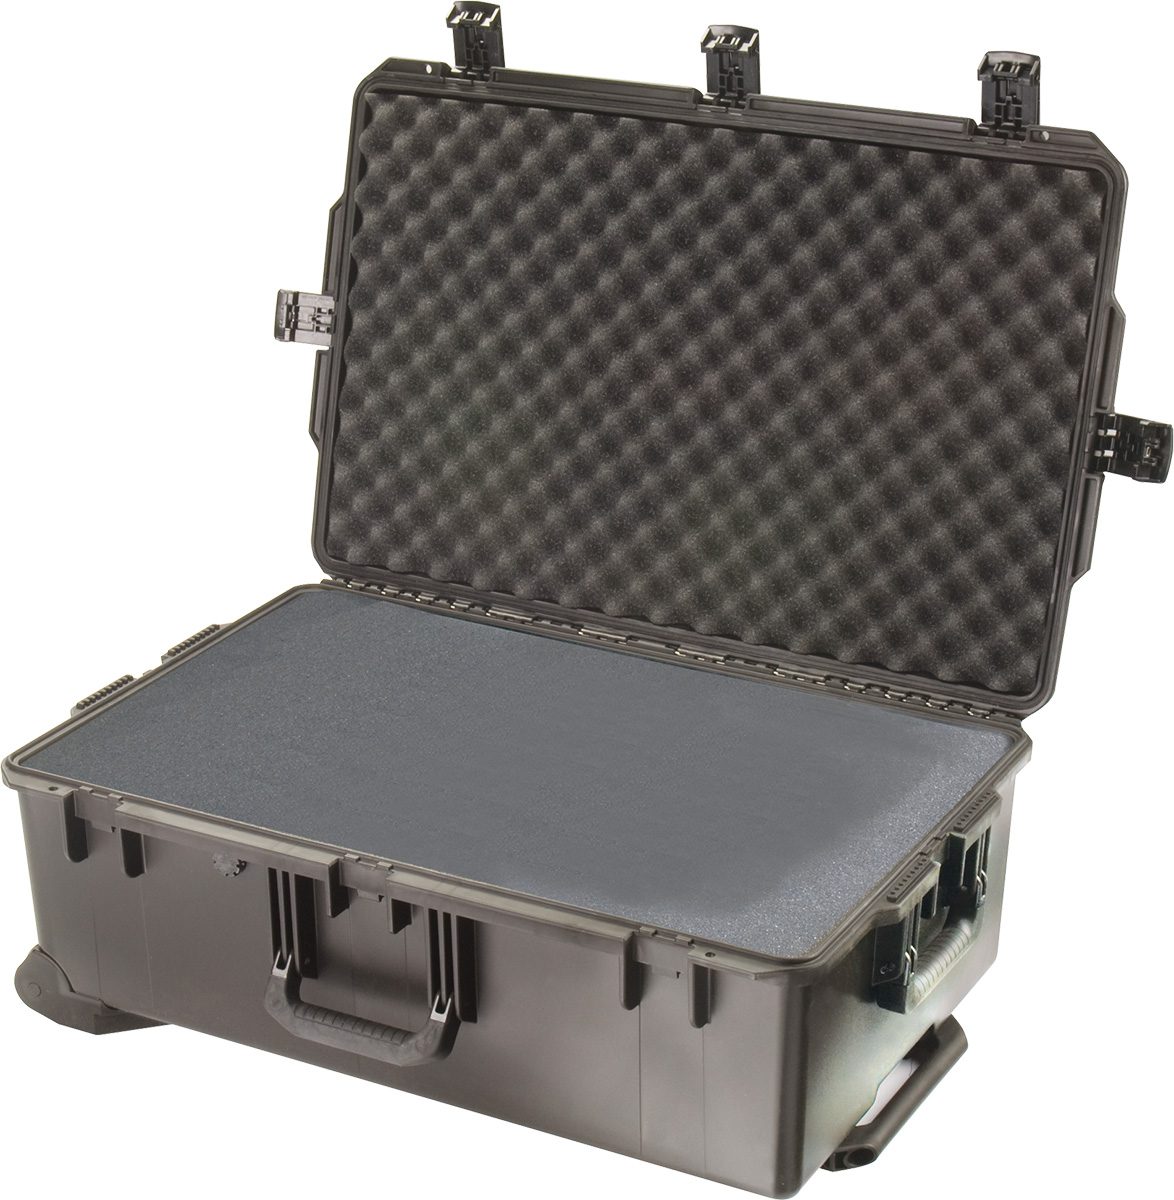 Pelican Products IM2950 Case - Tactical & Duty Gear